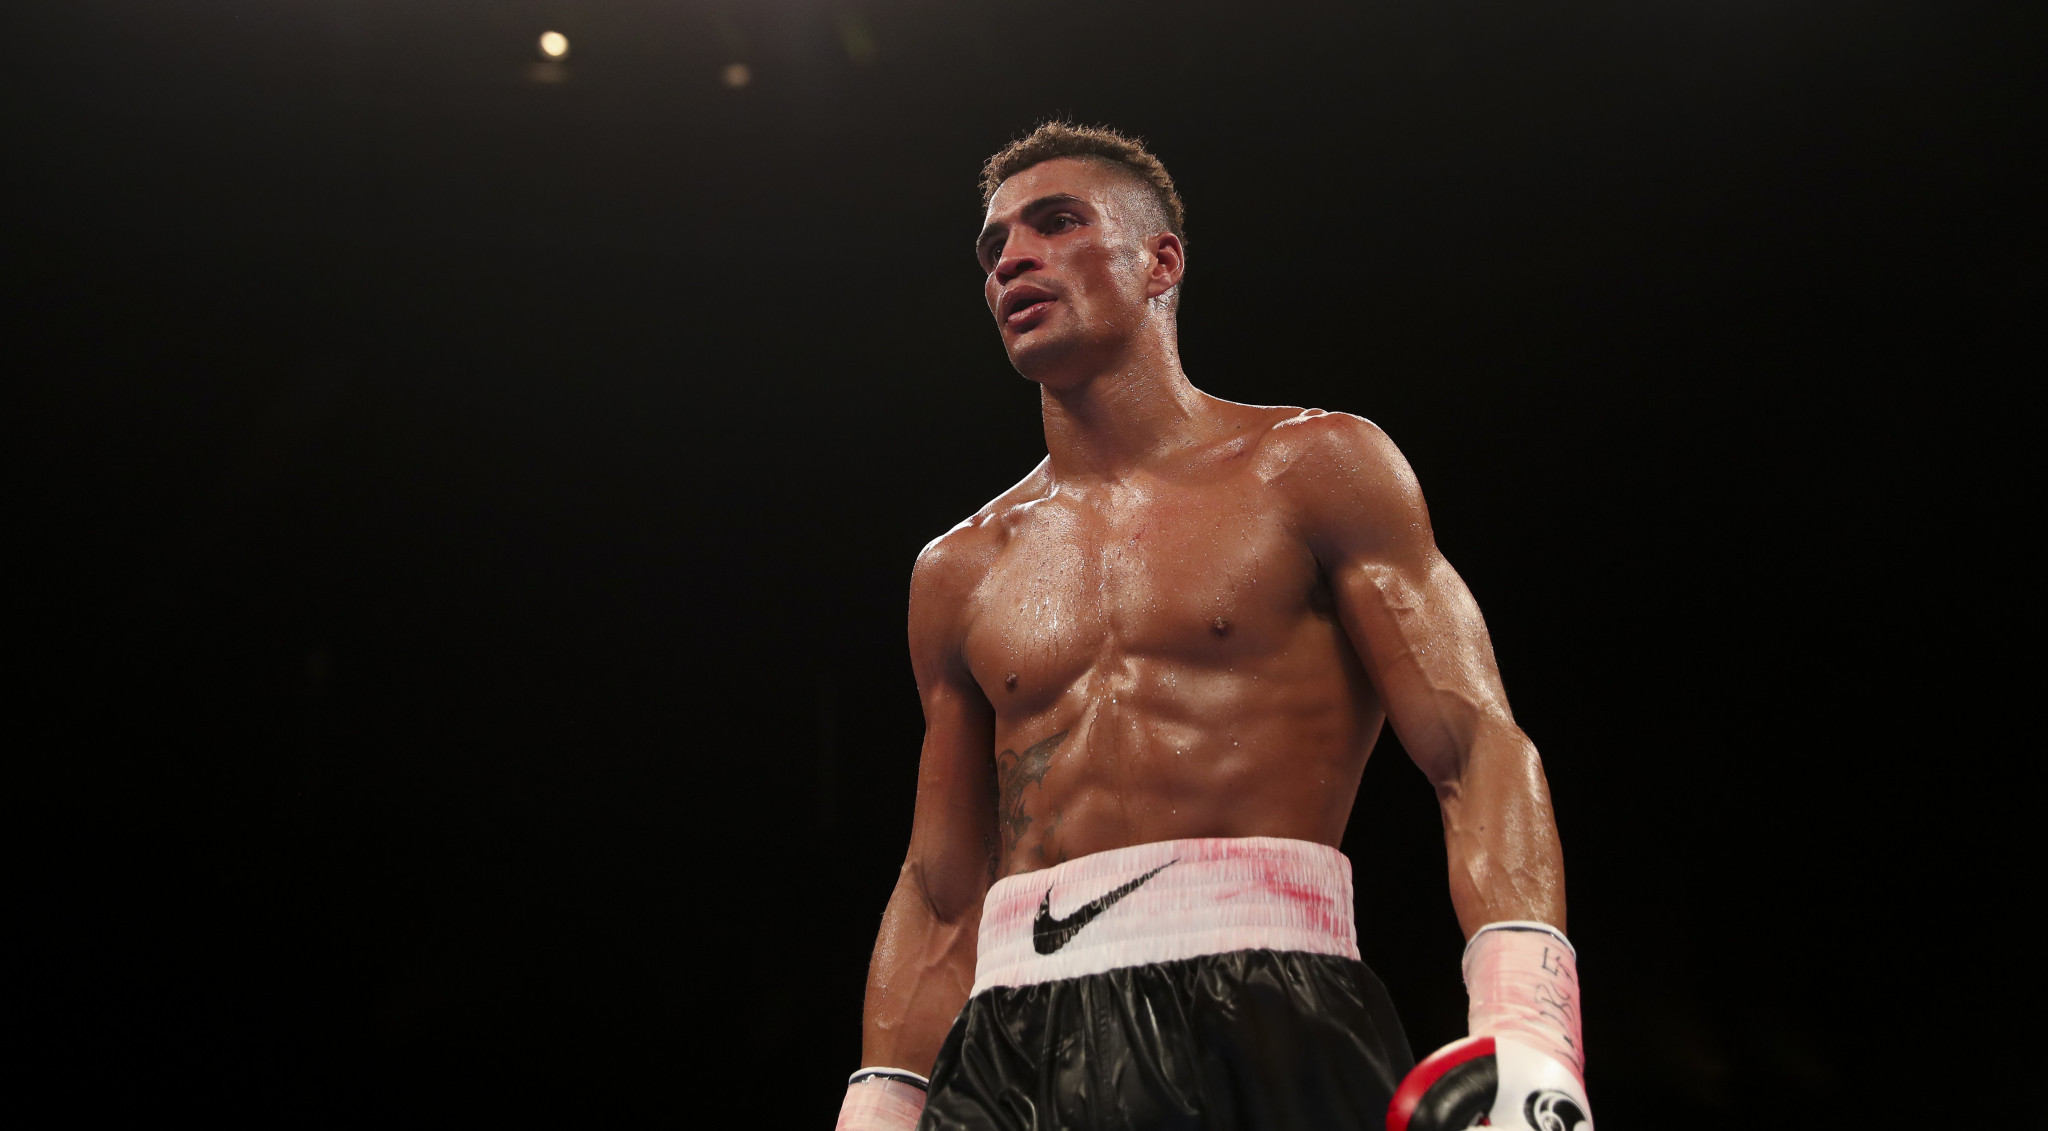 Former boxer Anthony Ogogo will be participating in the Travel to Tokyo initiative ©Getty Images